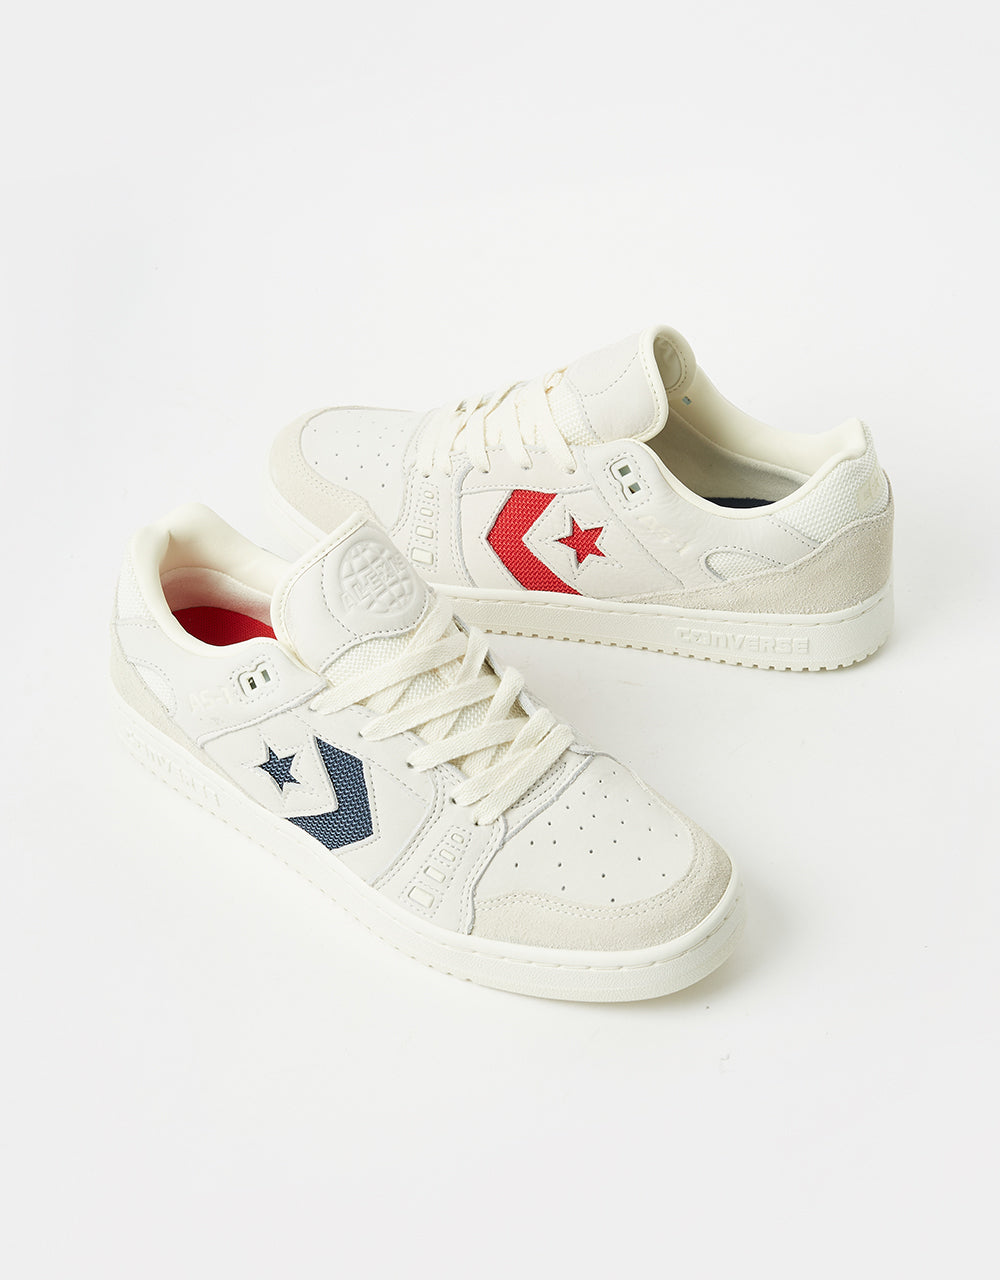 Converse AS-1 Pro Skate Shoes - Egret/Navy/Red